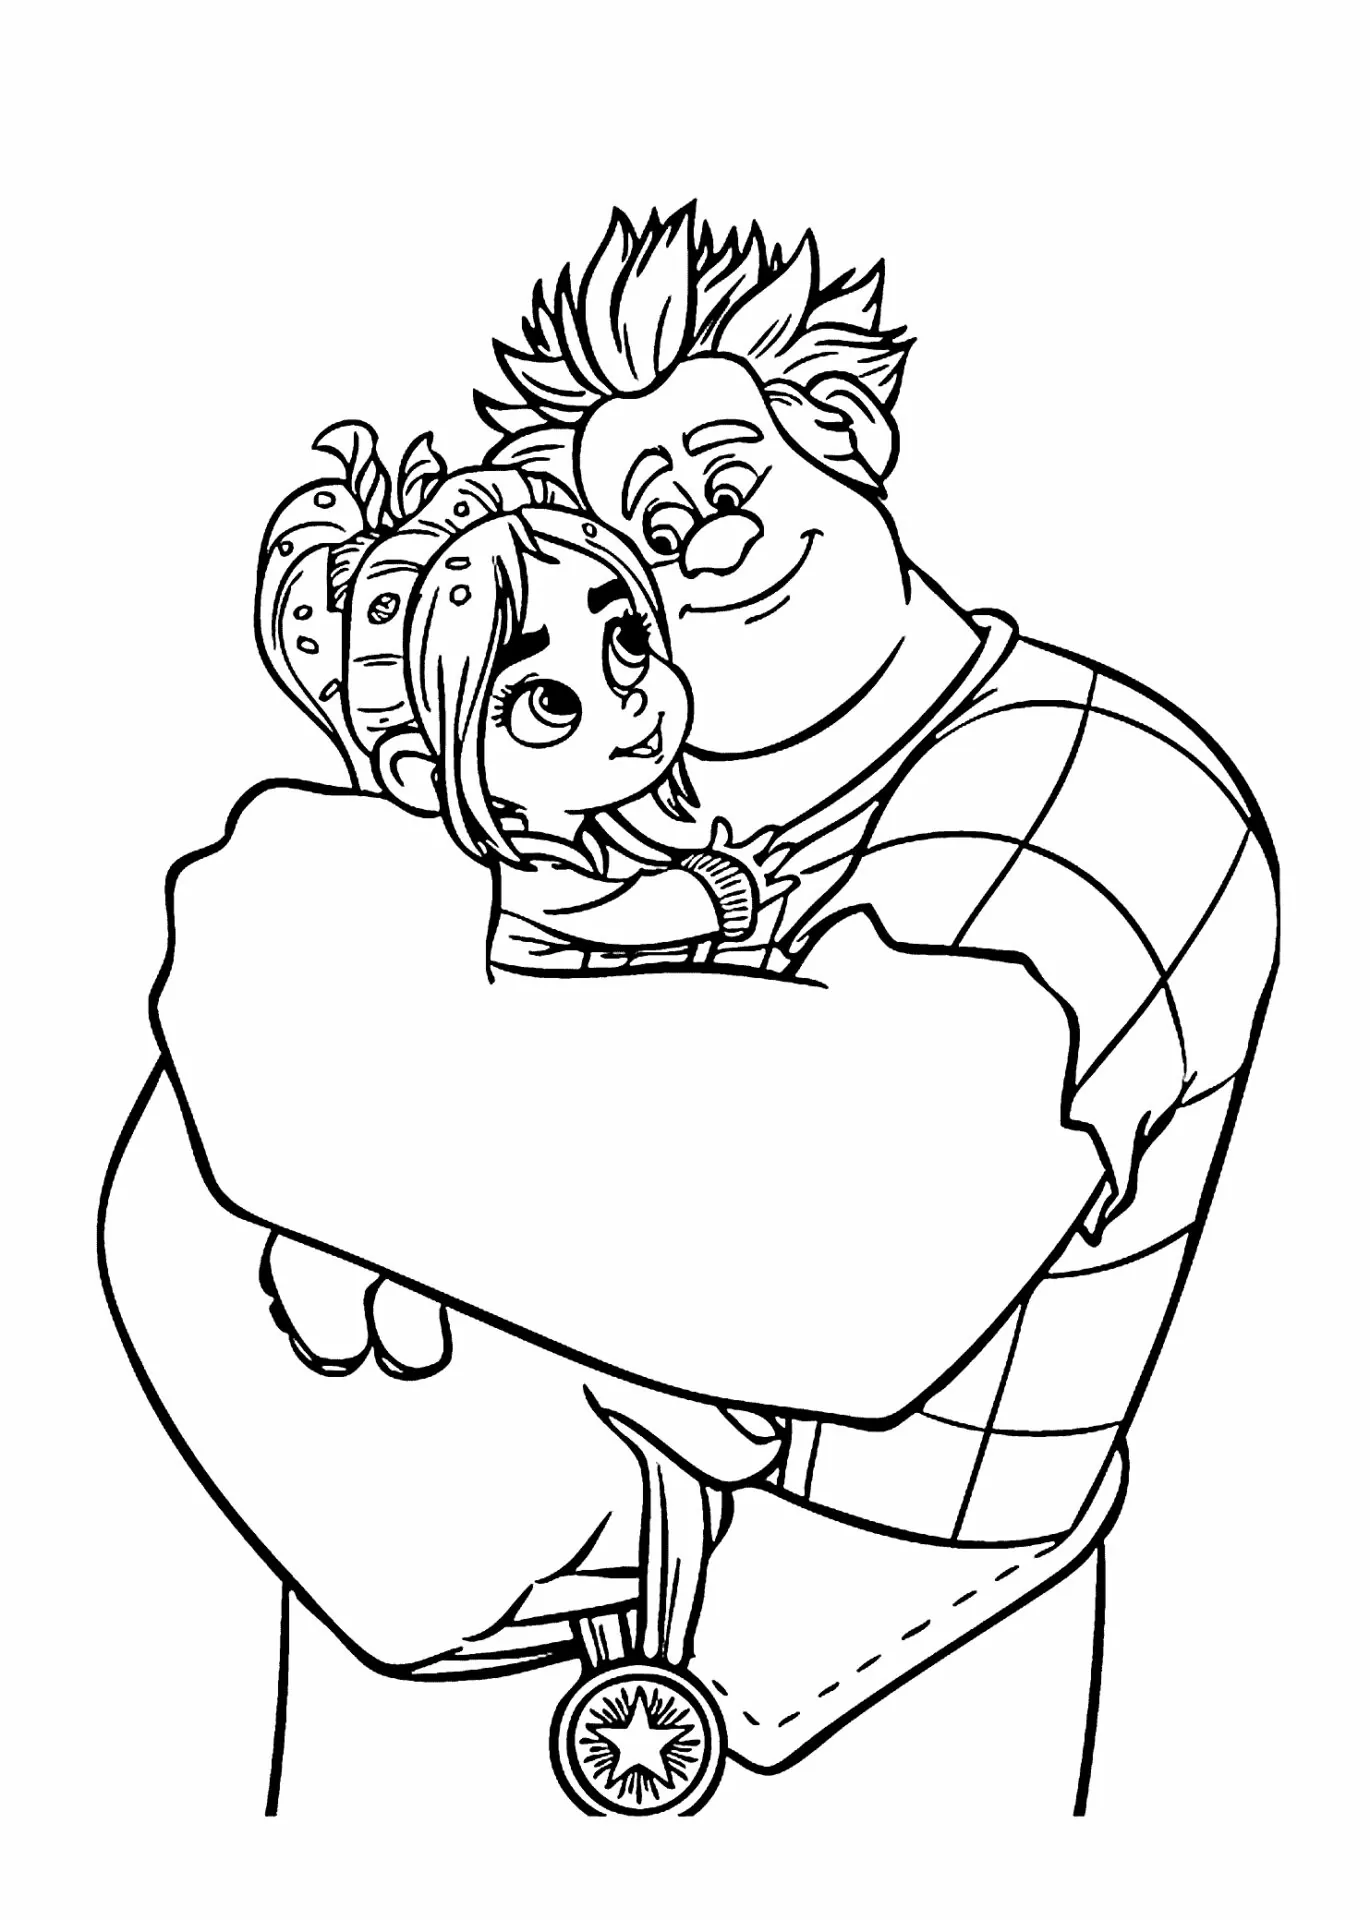 Ralph and Vanellope coloring pages for kids printable free Collection